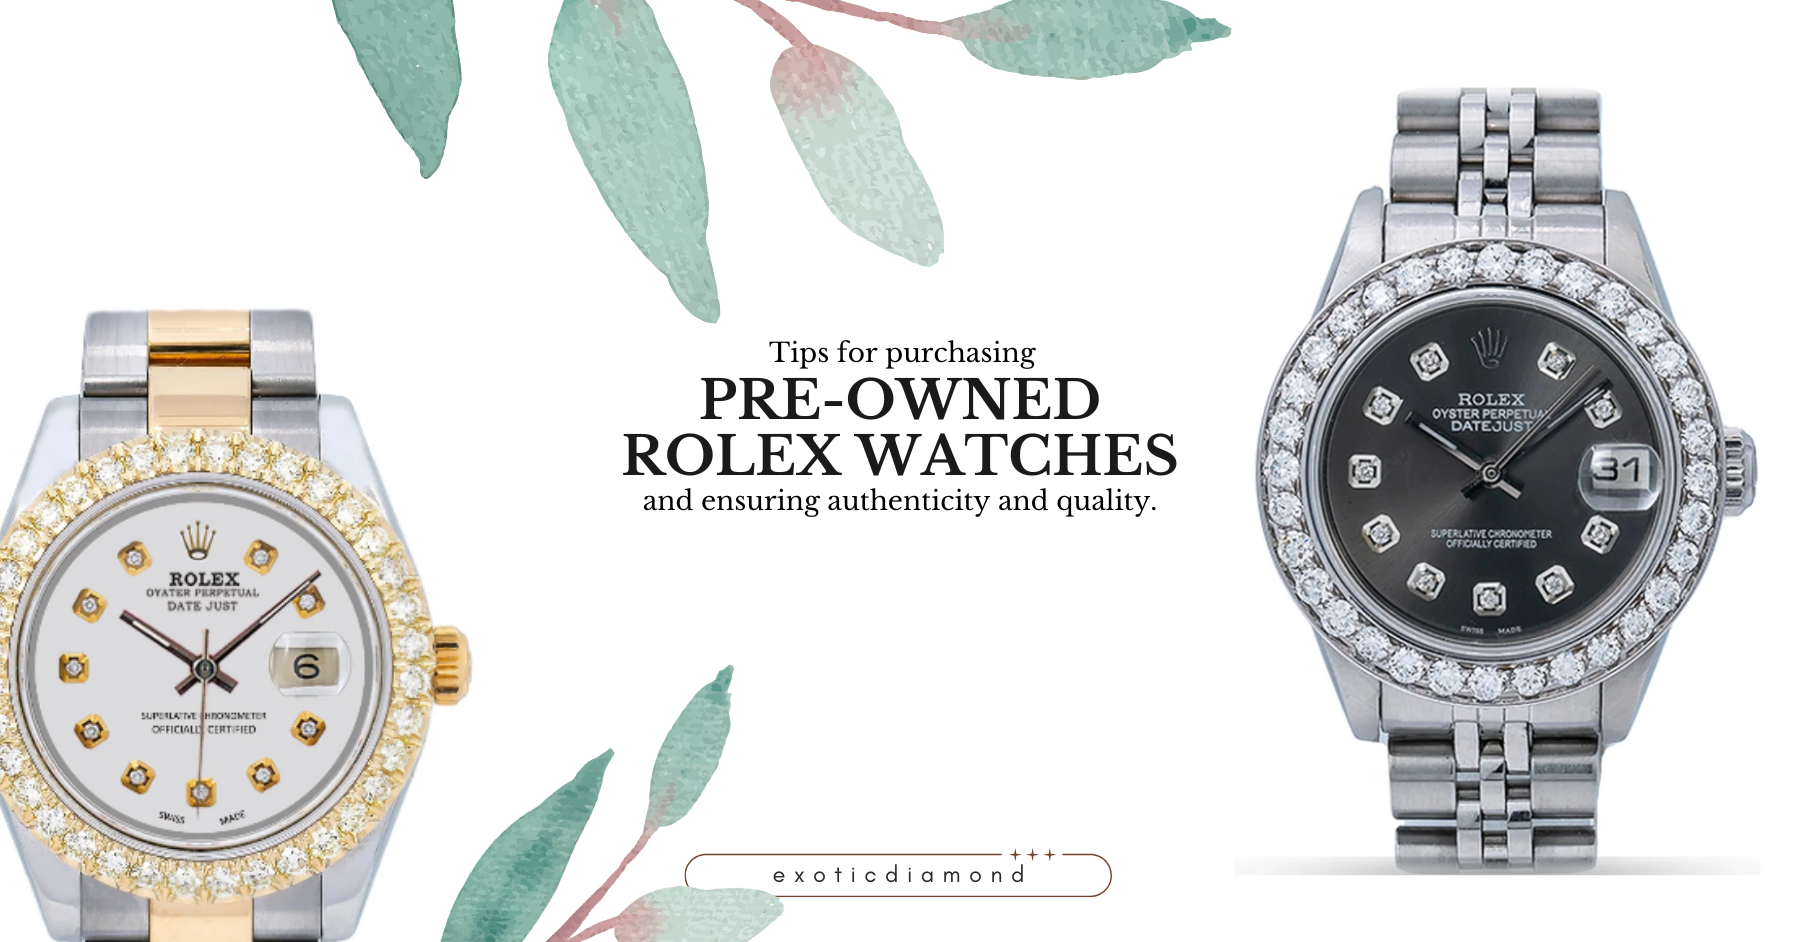 Tips for purchasing PRE-OWNED ROLEX WATCHES and ensuring authenticity and quality. ROLEX